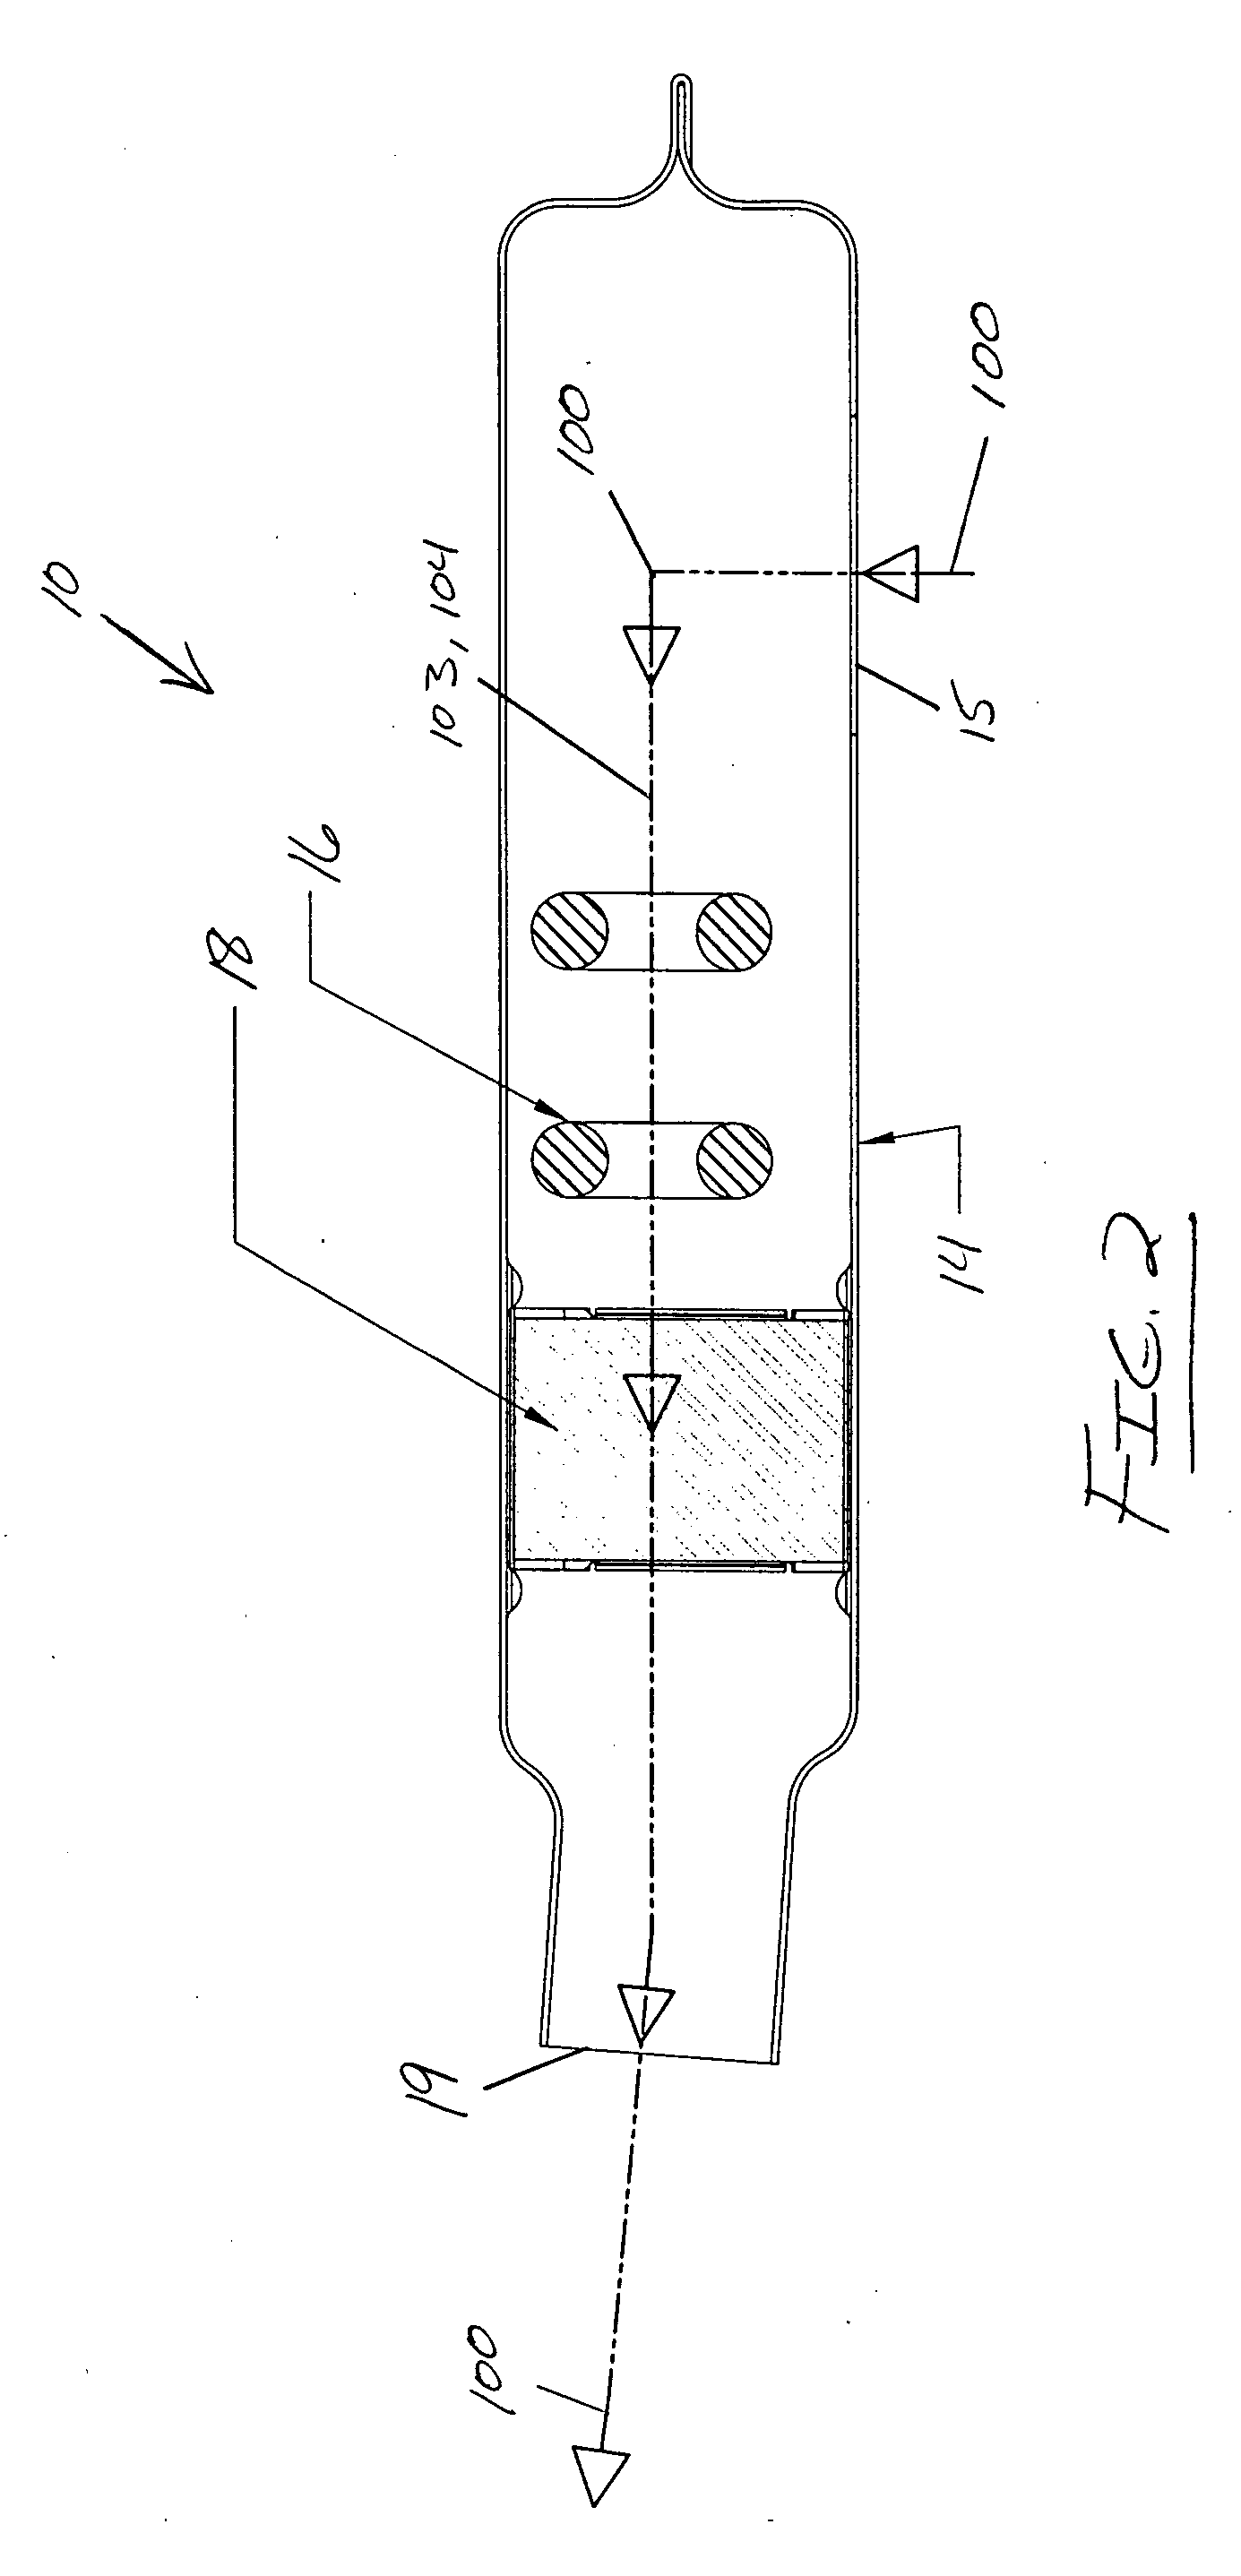 Catalytic converter unit and method for treating cooking emissions